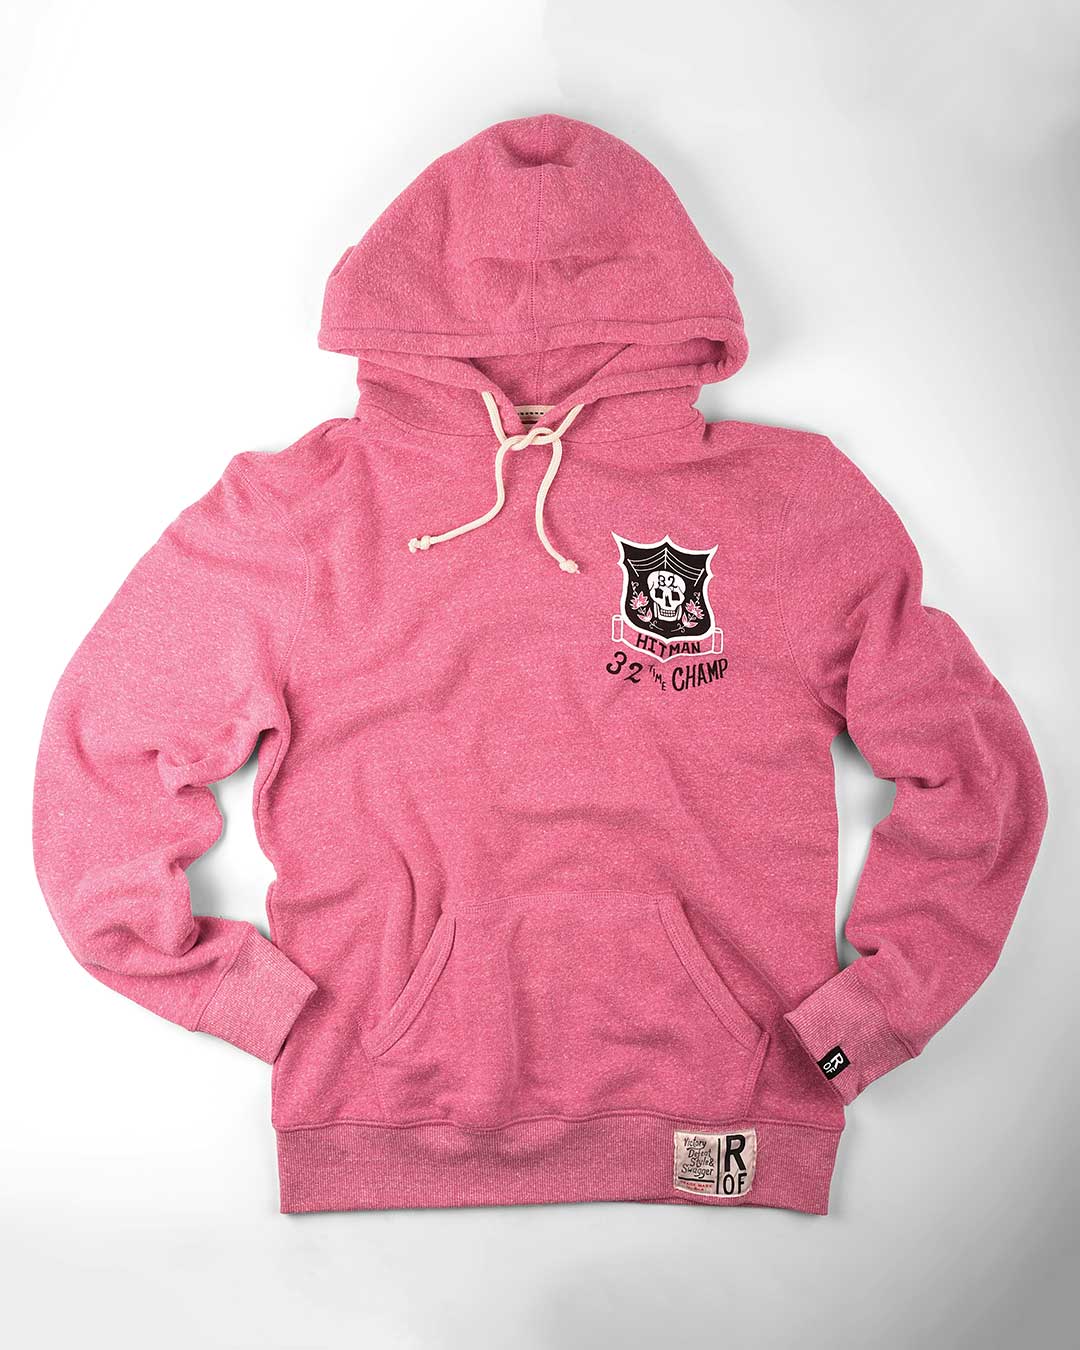 Bret Hart 32 Time Champ Pink PO Hoody - Roots of Fight